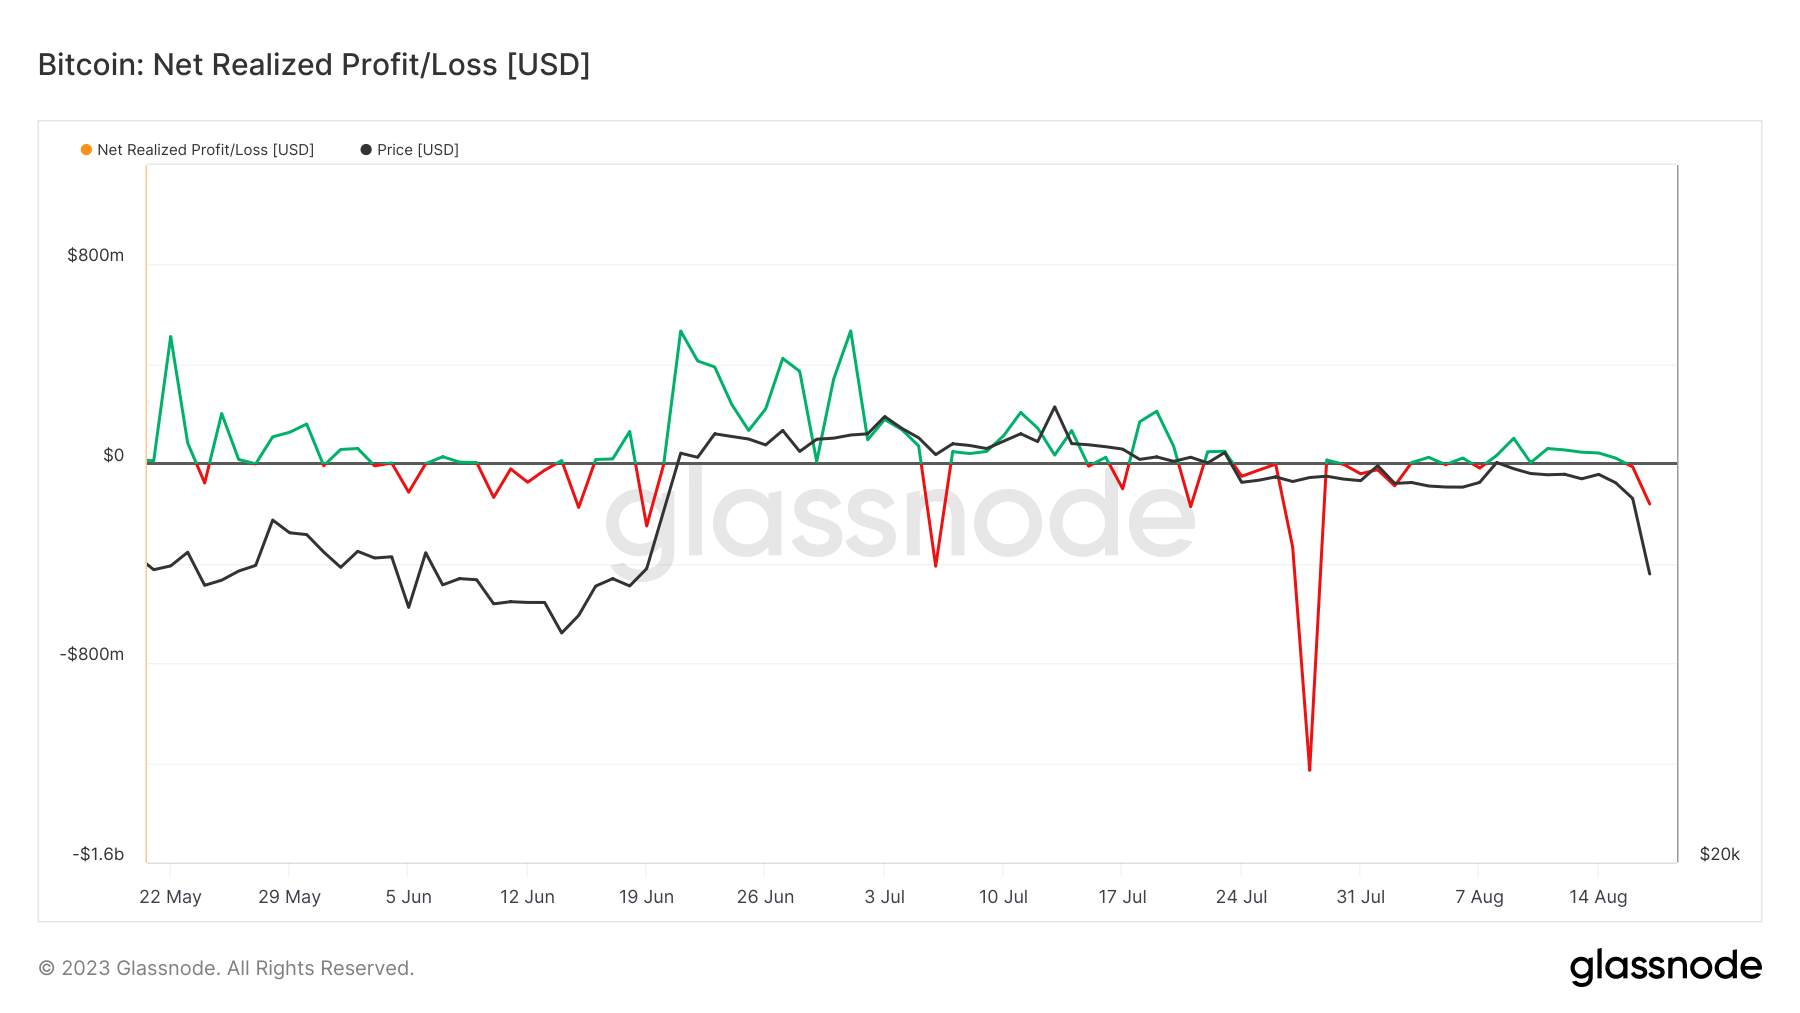 net realized loss bitcoin august